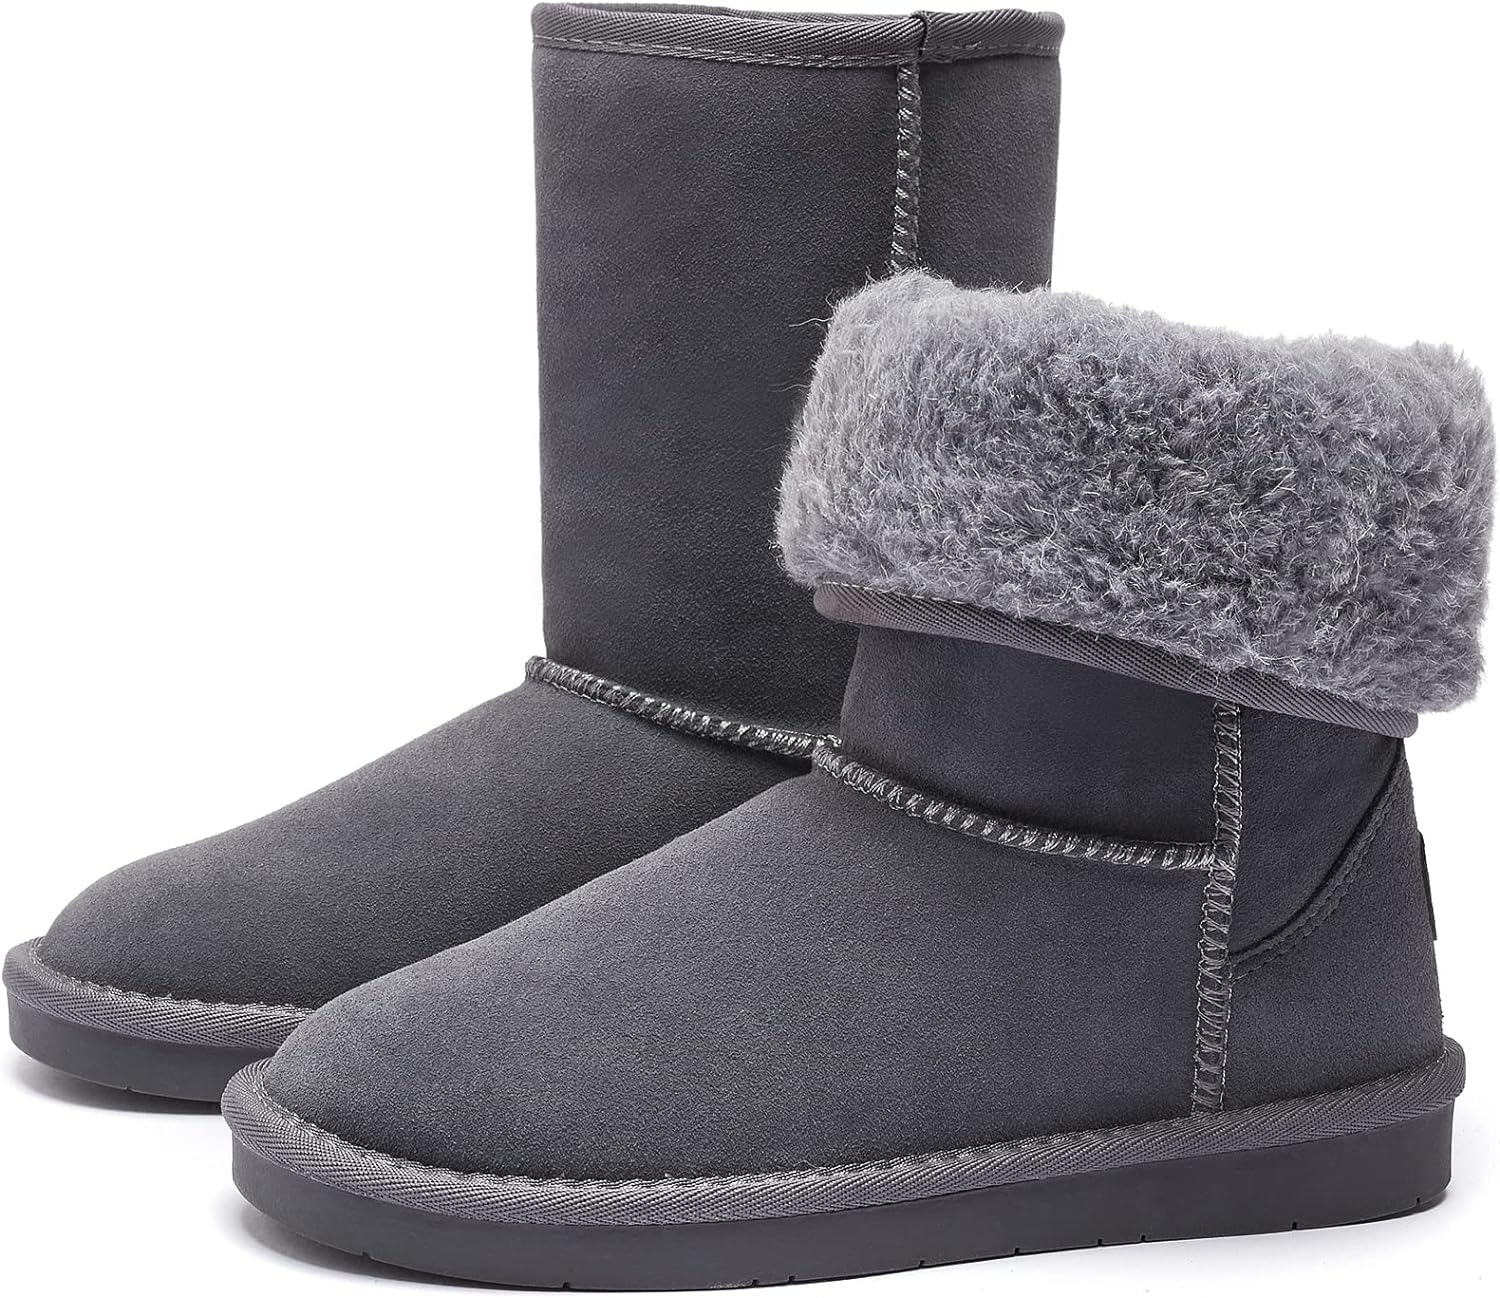 Adokoo Women' Winter Snow Boots Warm Cow Suede Leather Mid Calf Boots Ankle Booties